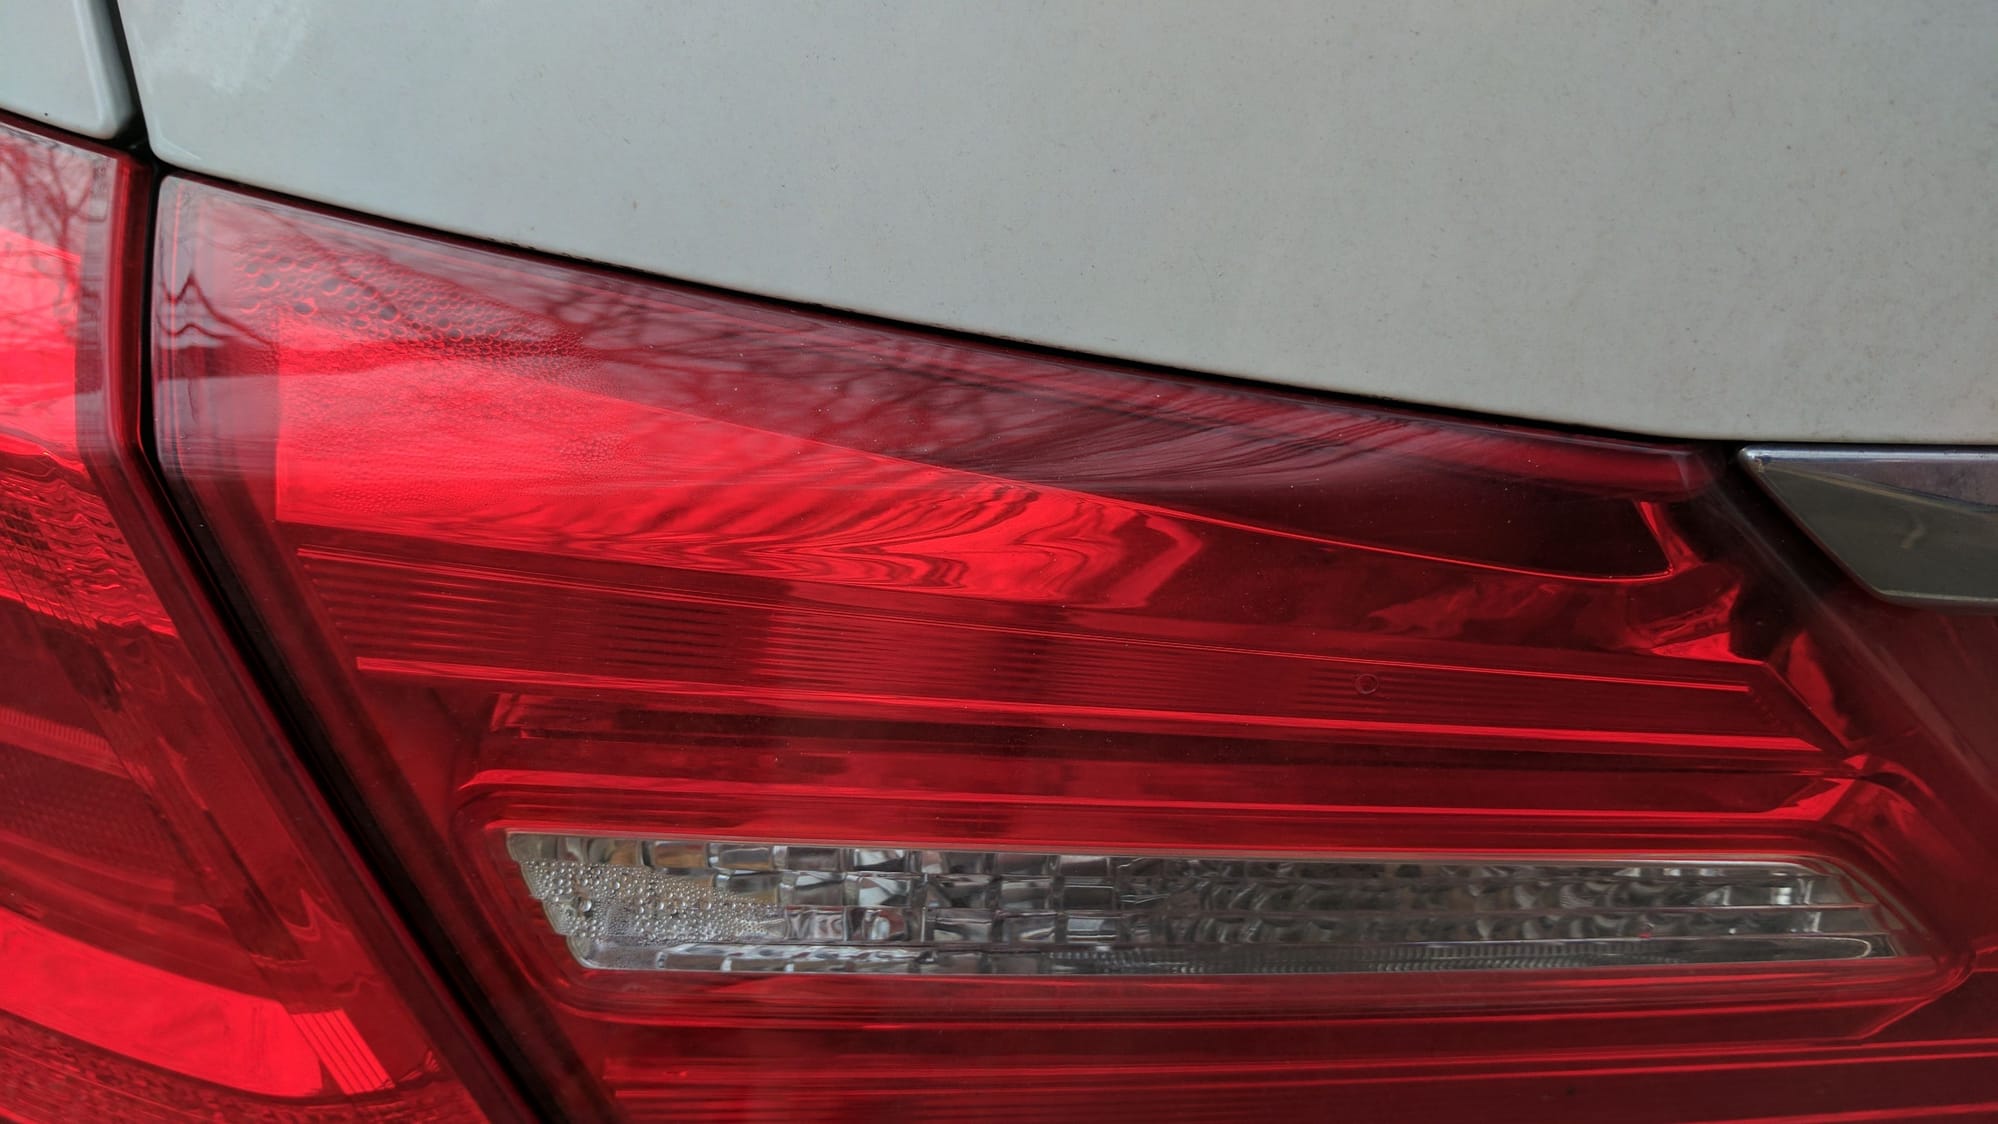 water in tail lights - AcuraZine - Acura Enthusiast Community